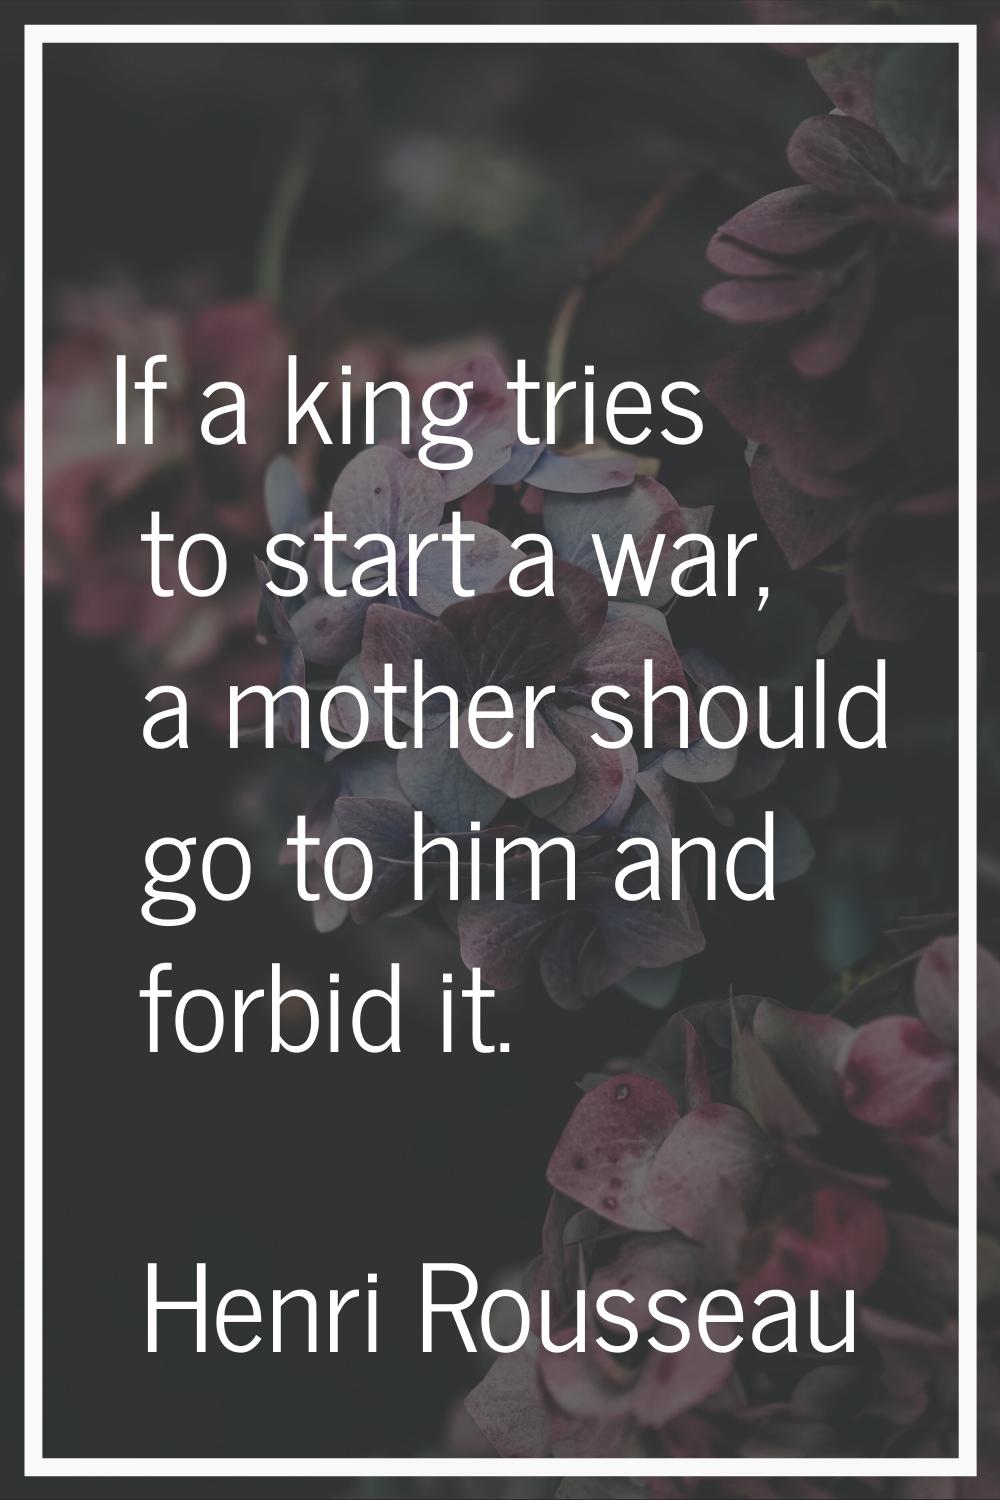 If a king tries to start a war, a mother should go to him and forbid it.